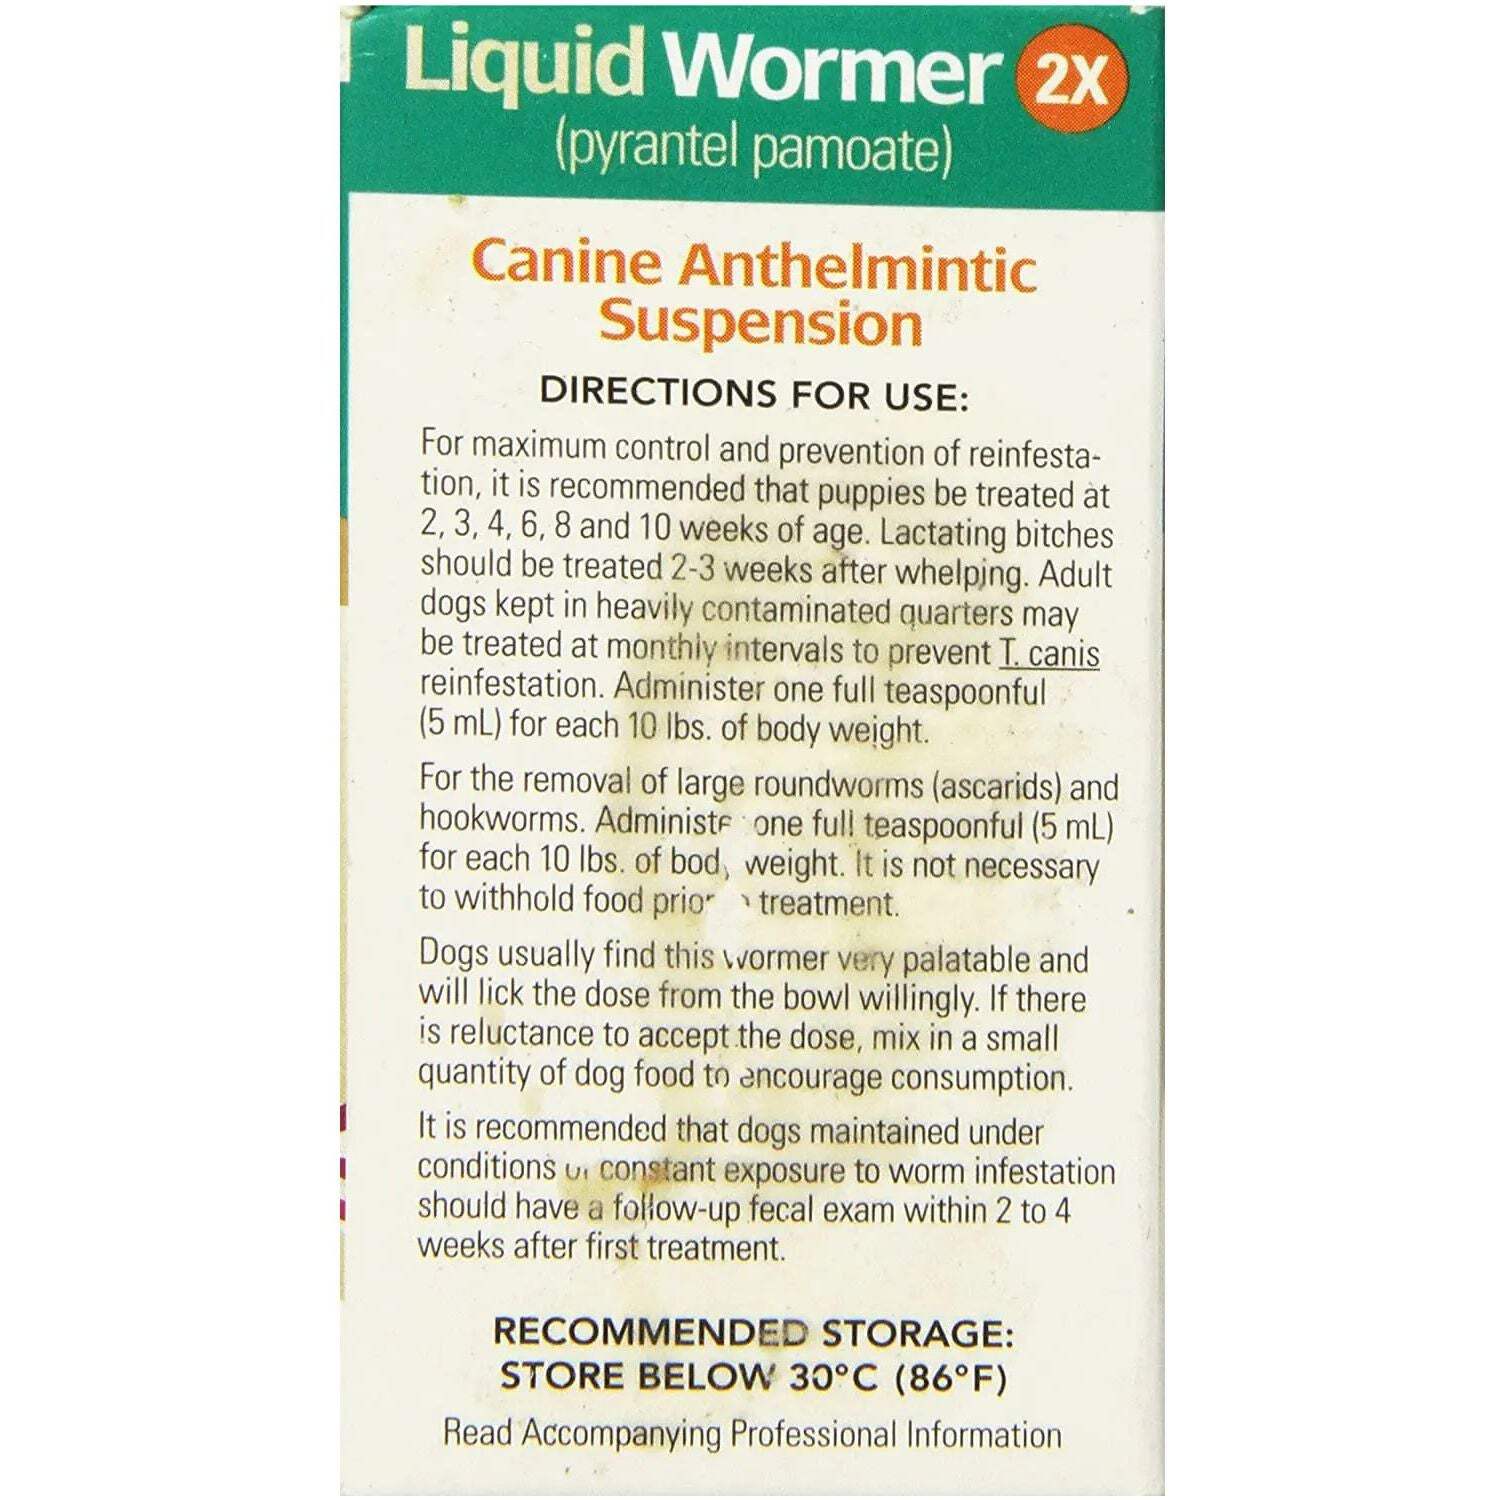 Durvet Liquid Wormer 2x for Puppies and Adult Dogs 2 oz. - image 3 of 3